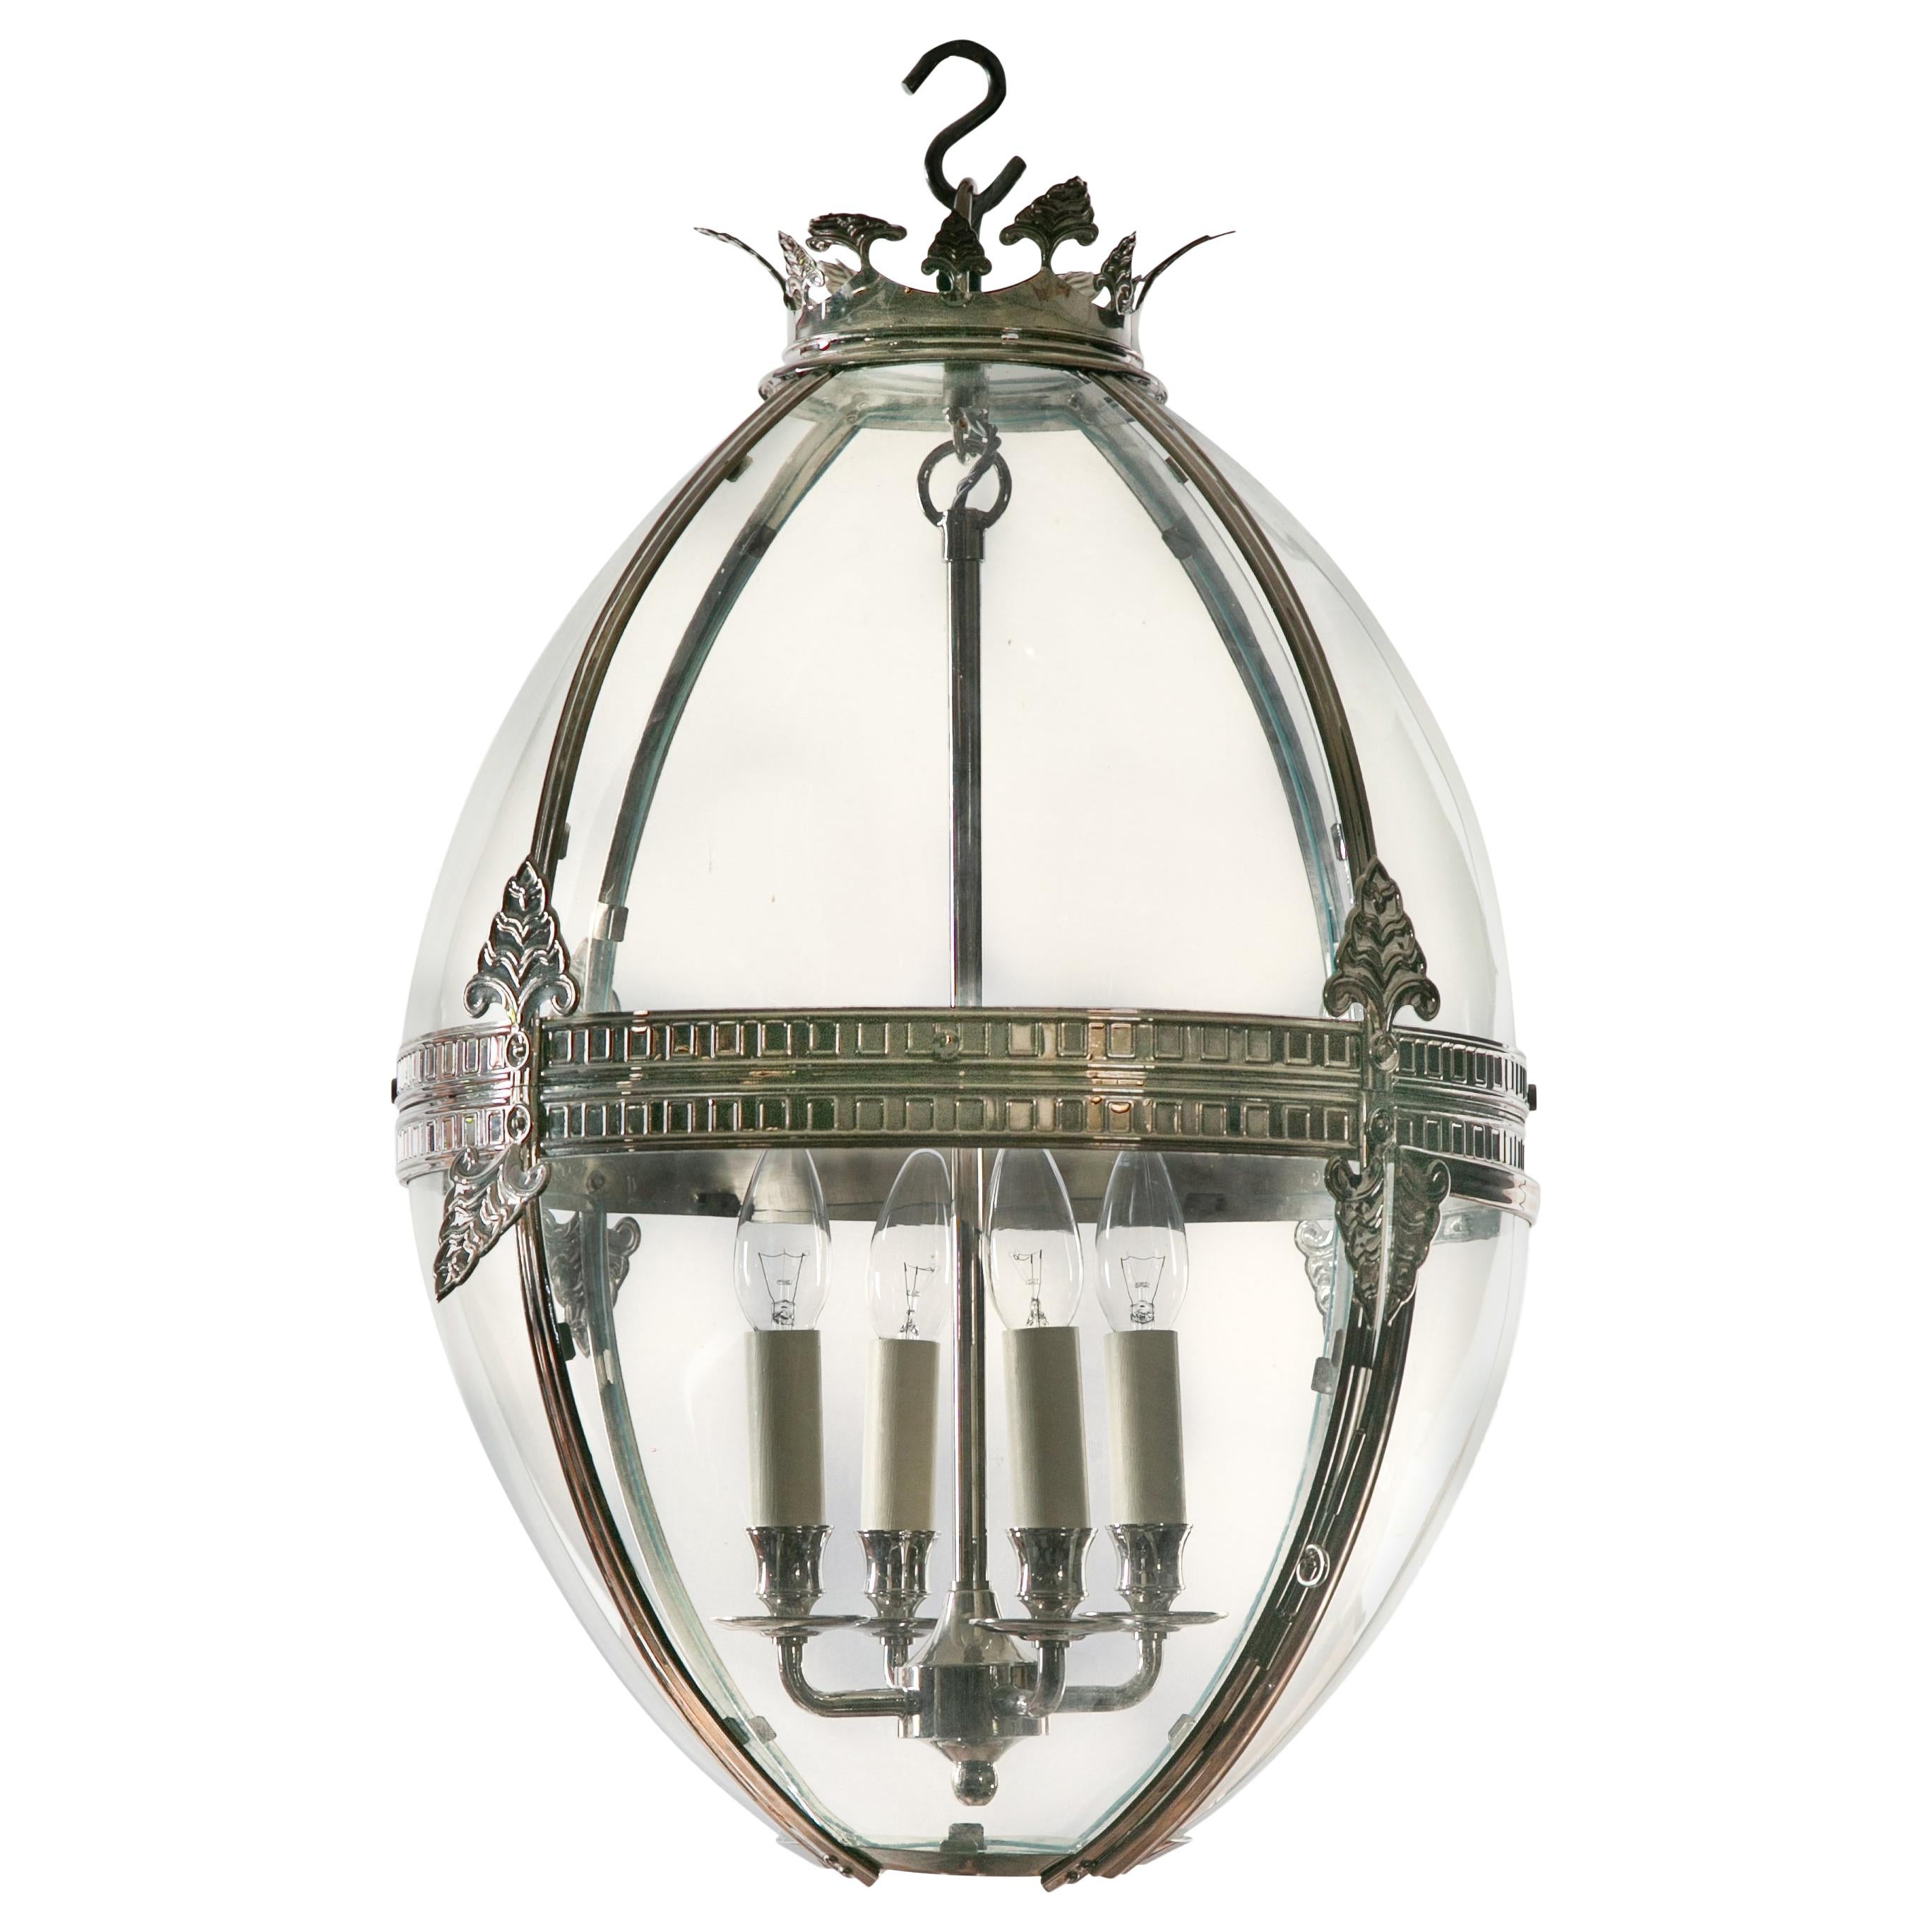 English Midcentury Nickel and Glass Four-Light Ovoid Lantern with Palmettes For Sale